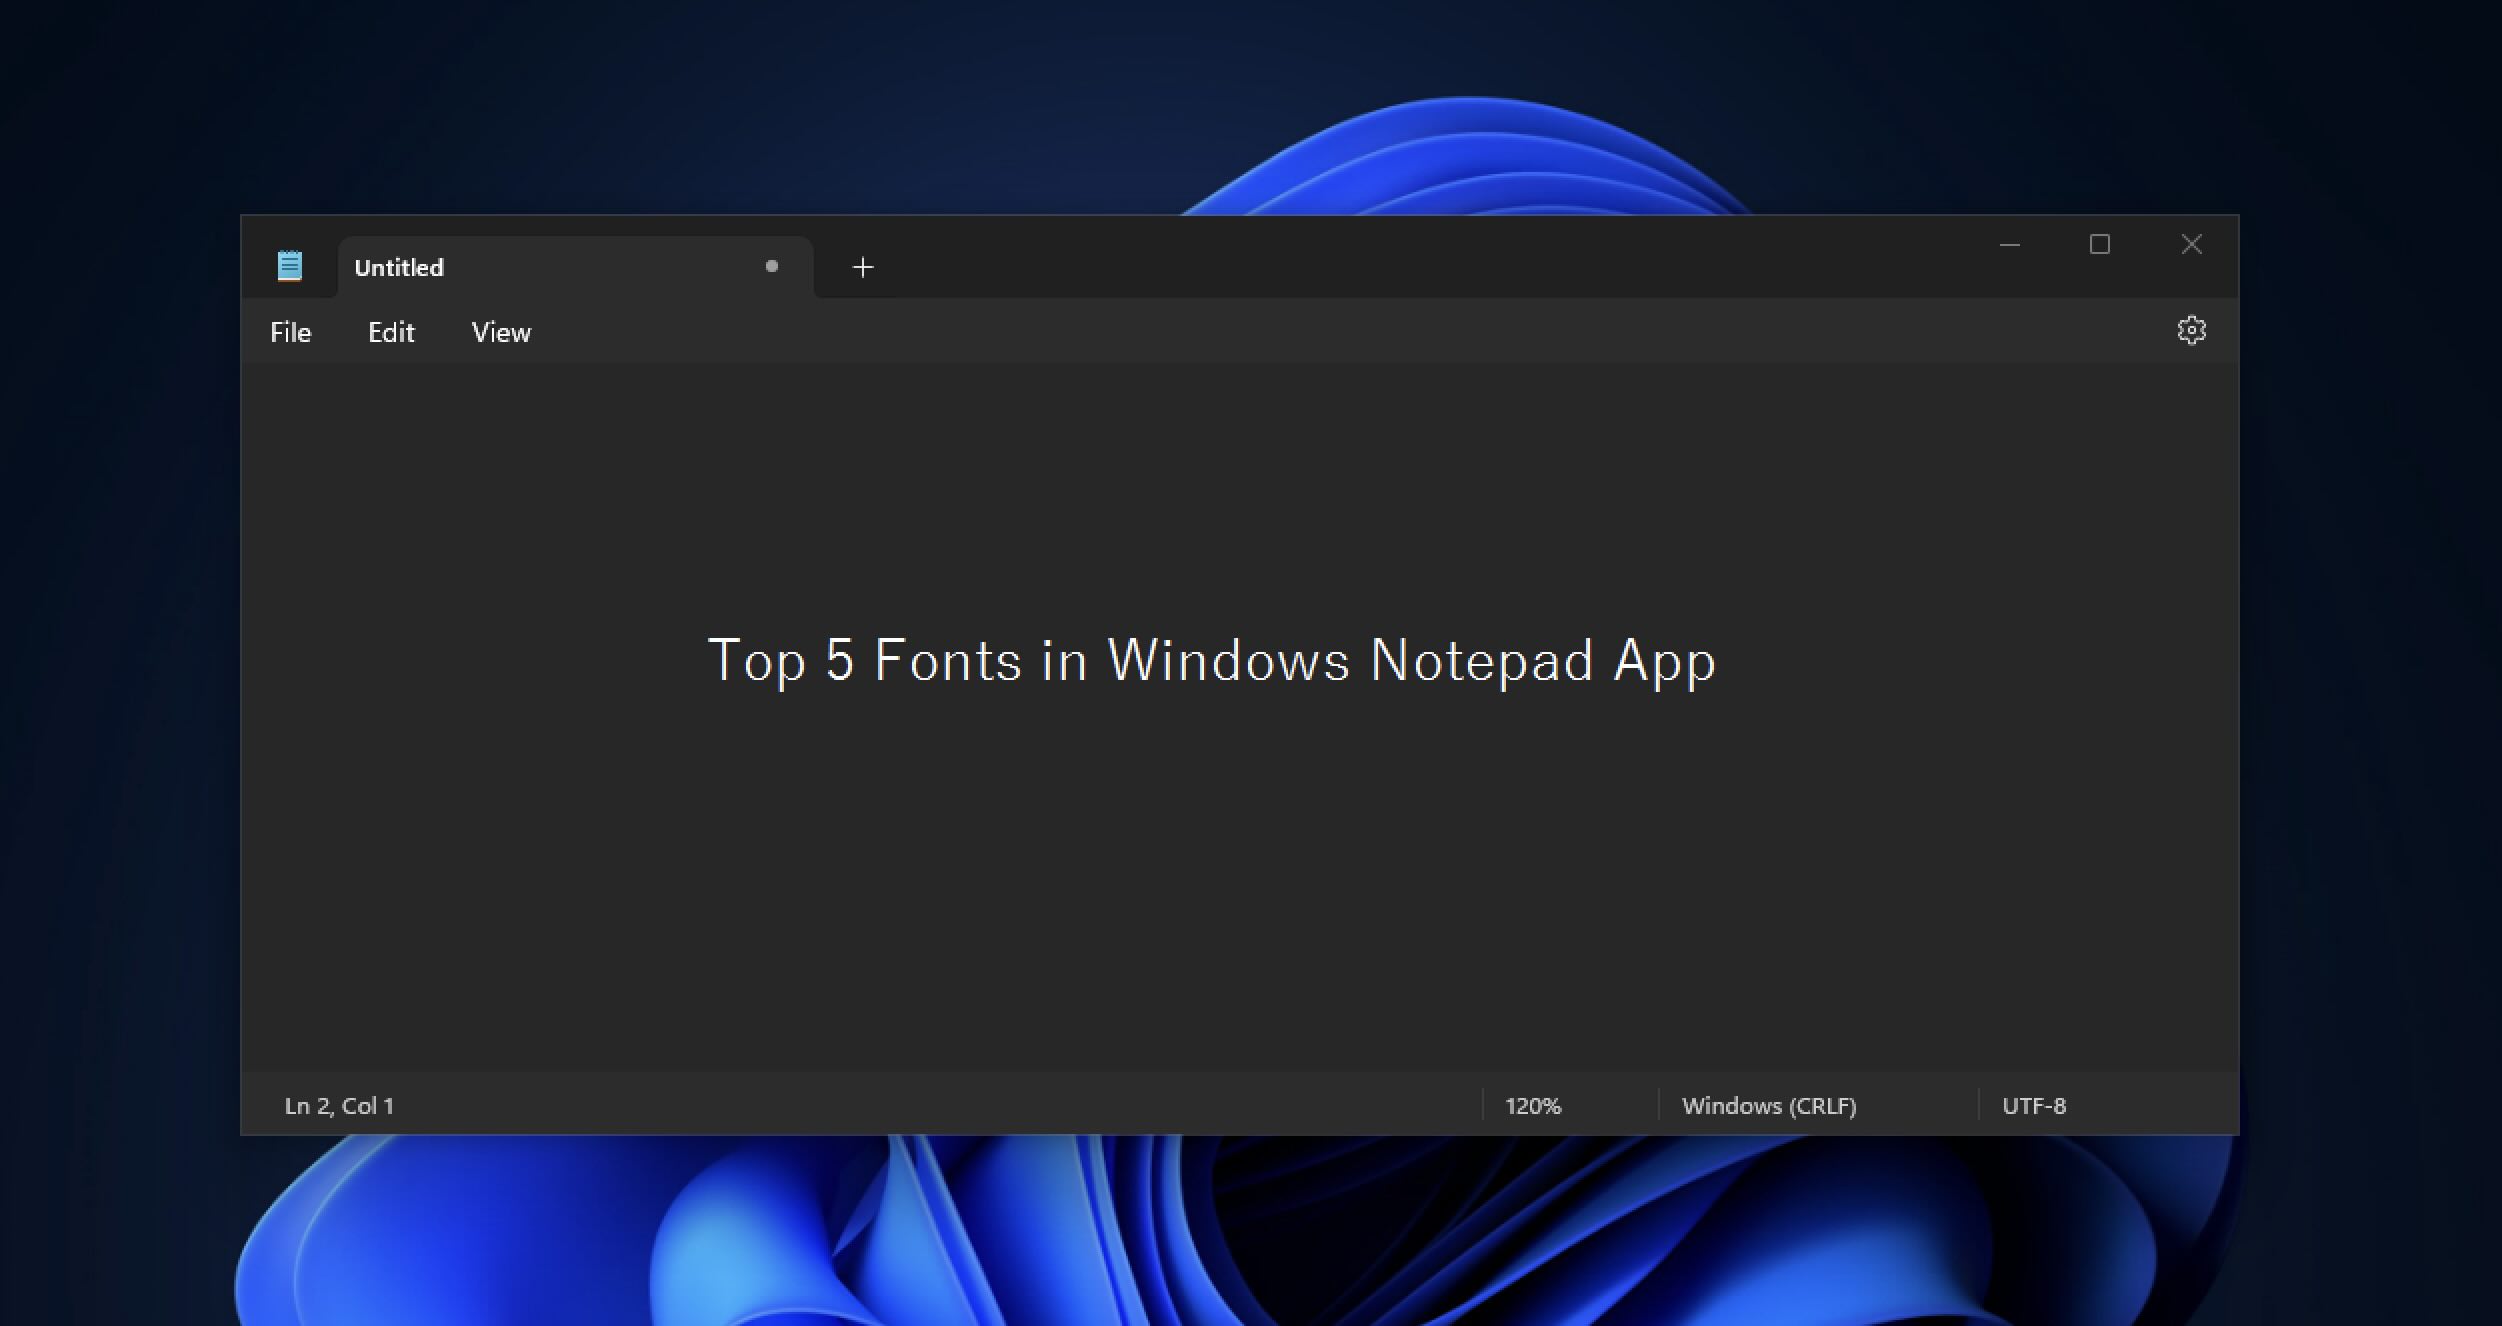 Top 5 Fonts in Windows Notepad App